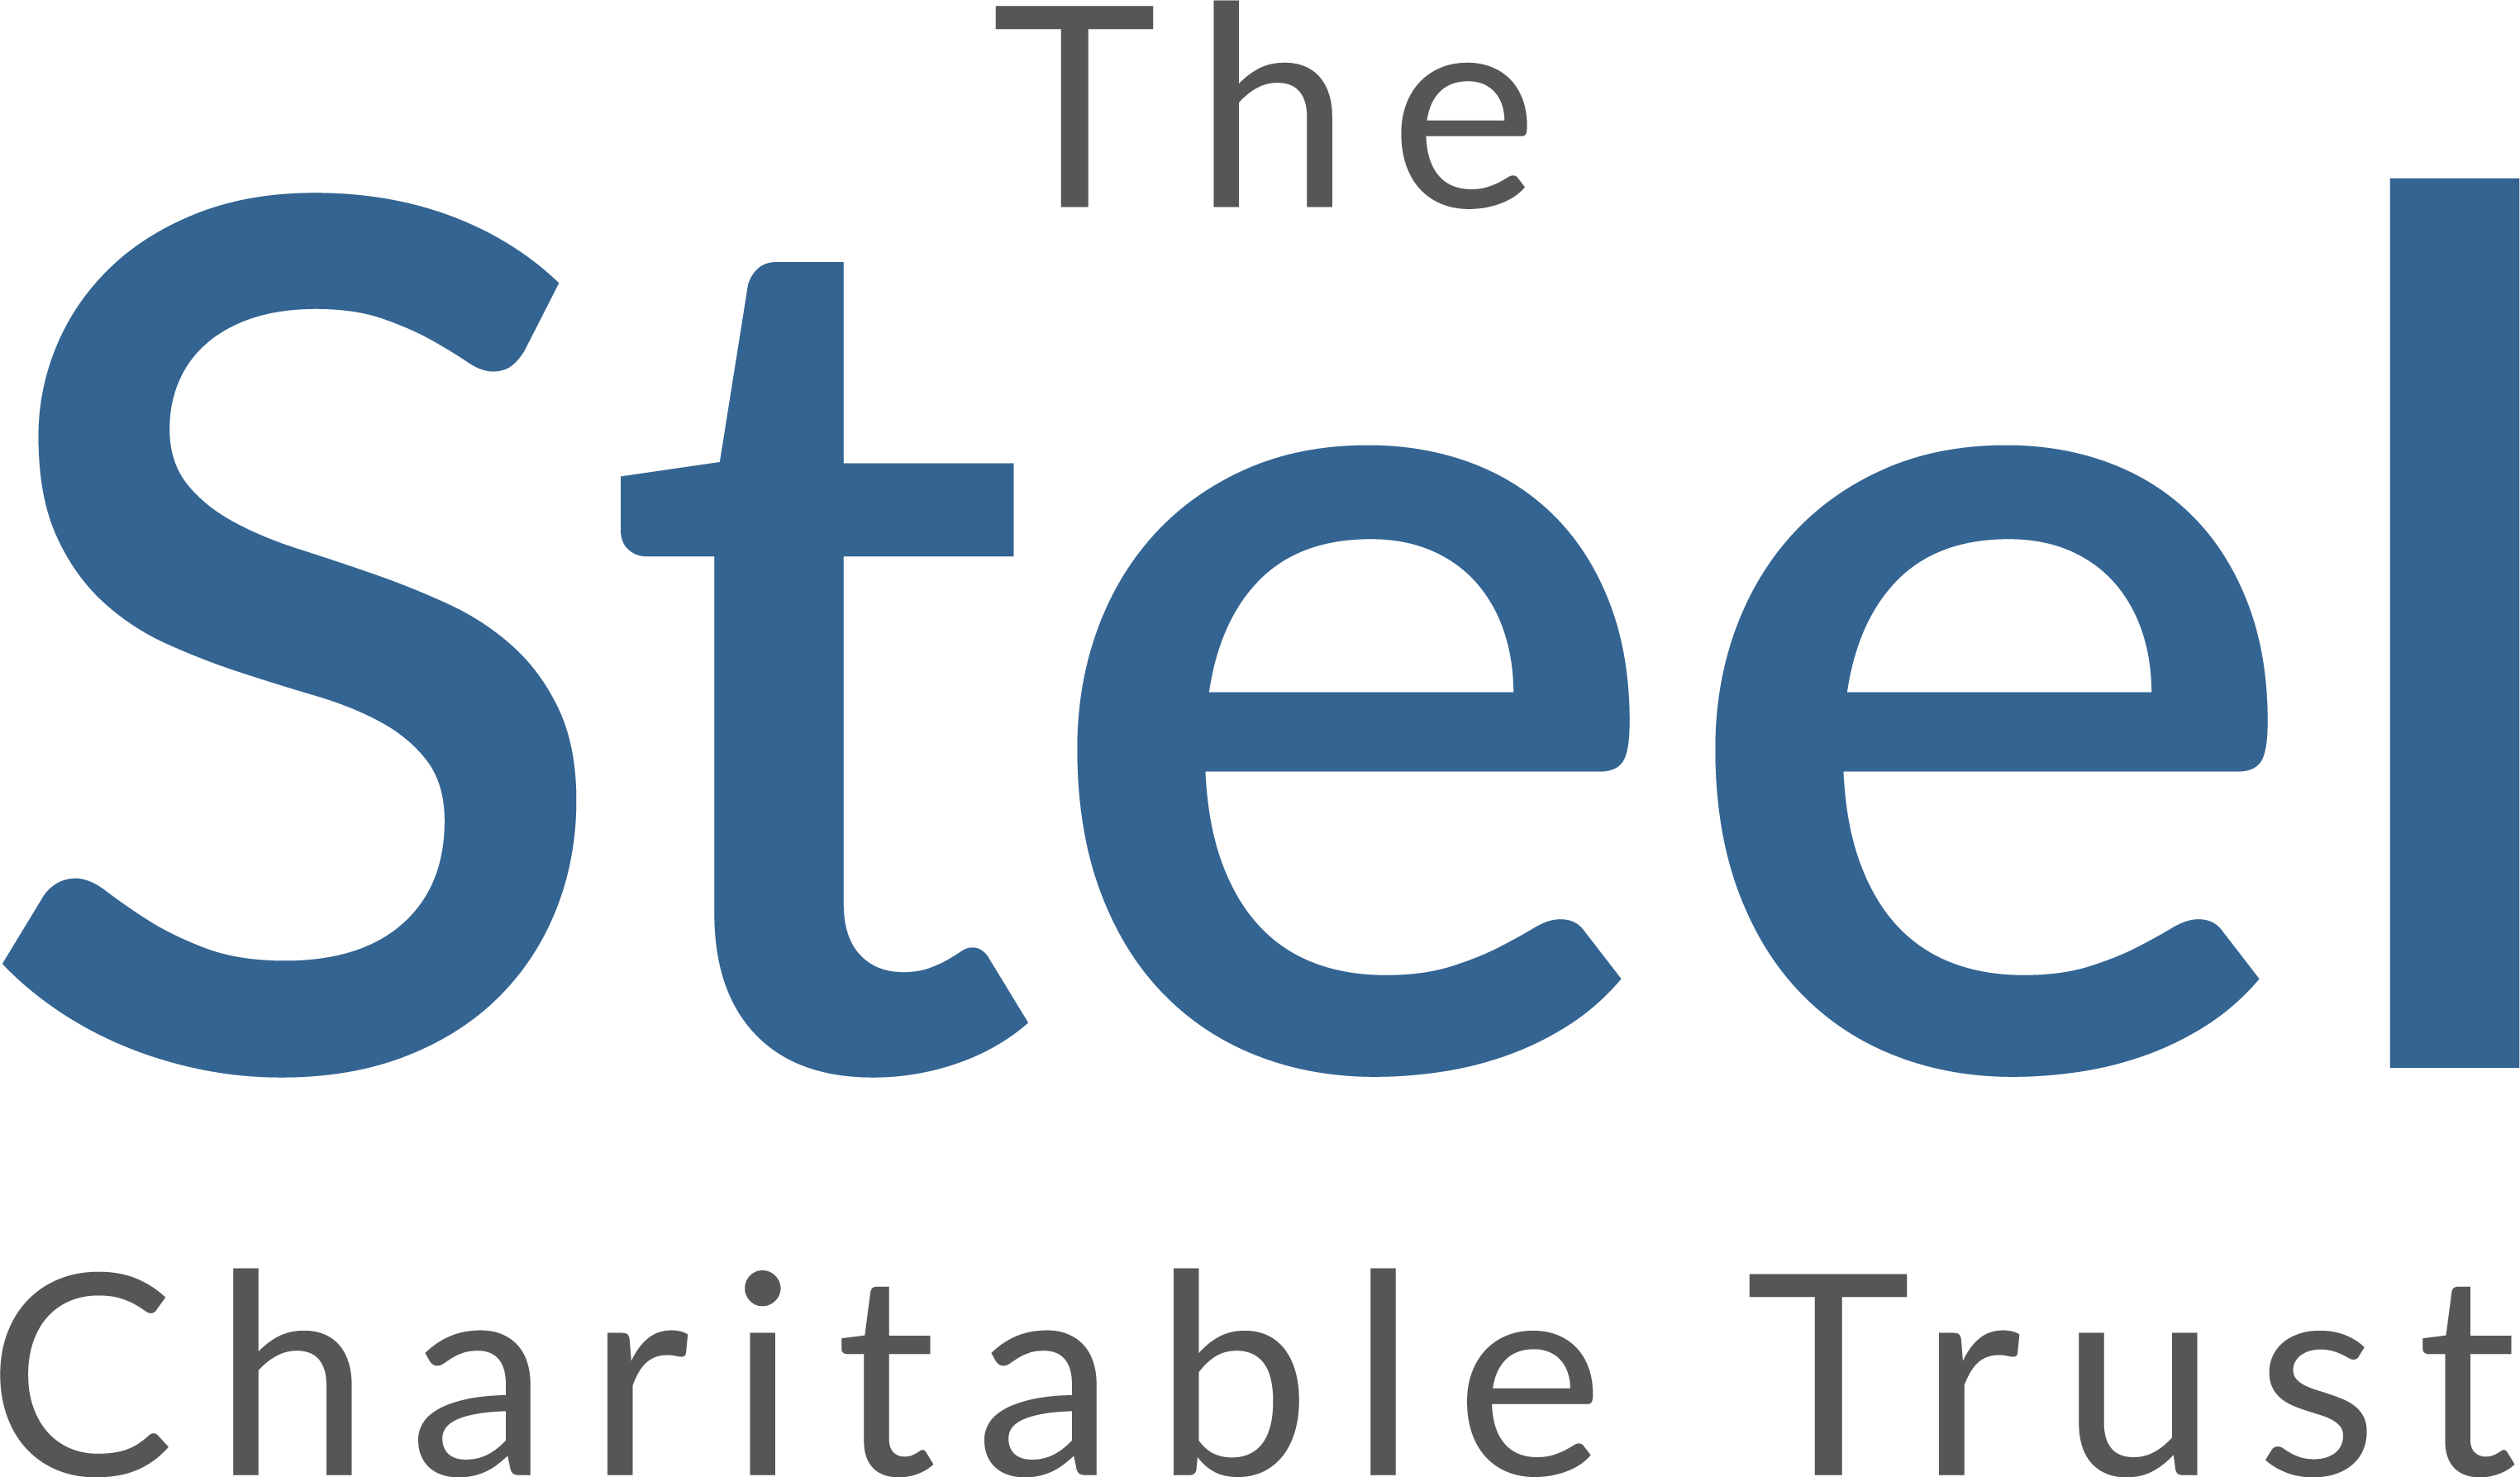 Logo of The Steel Charitable Trust with the word "Steel" in large blue letters and "The" and "Charitable Trust" in smaller gray letters.